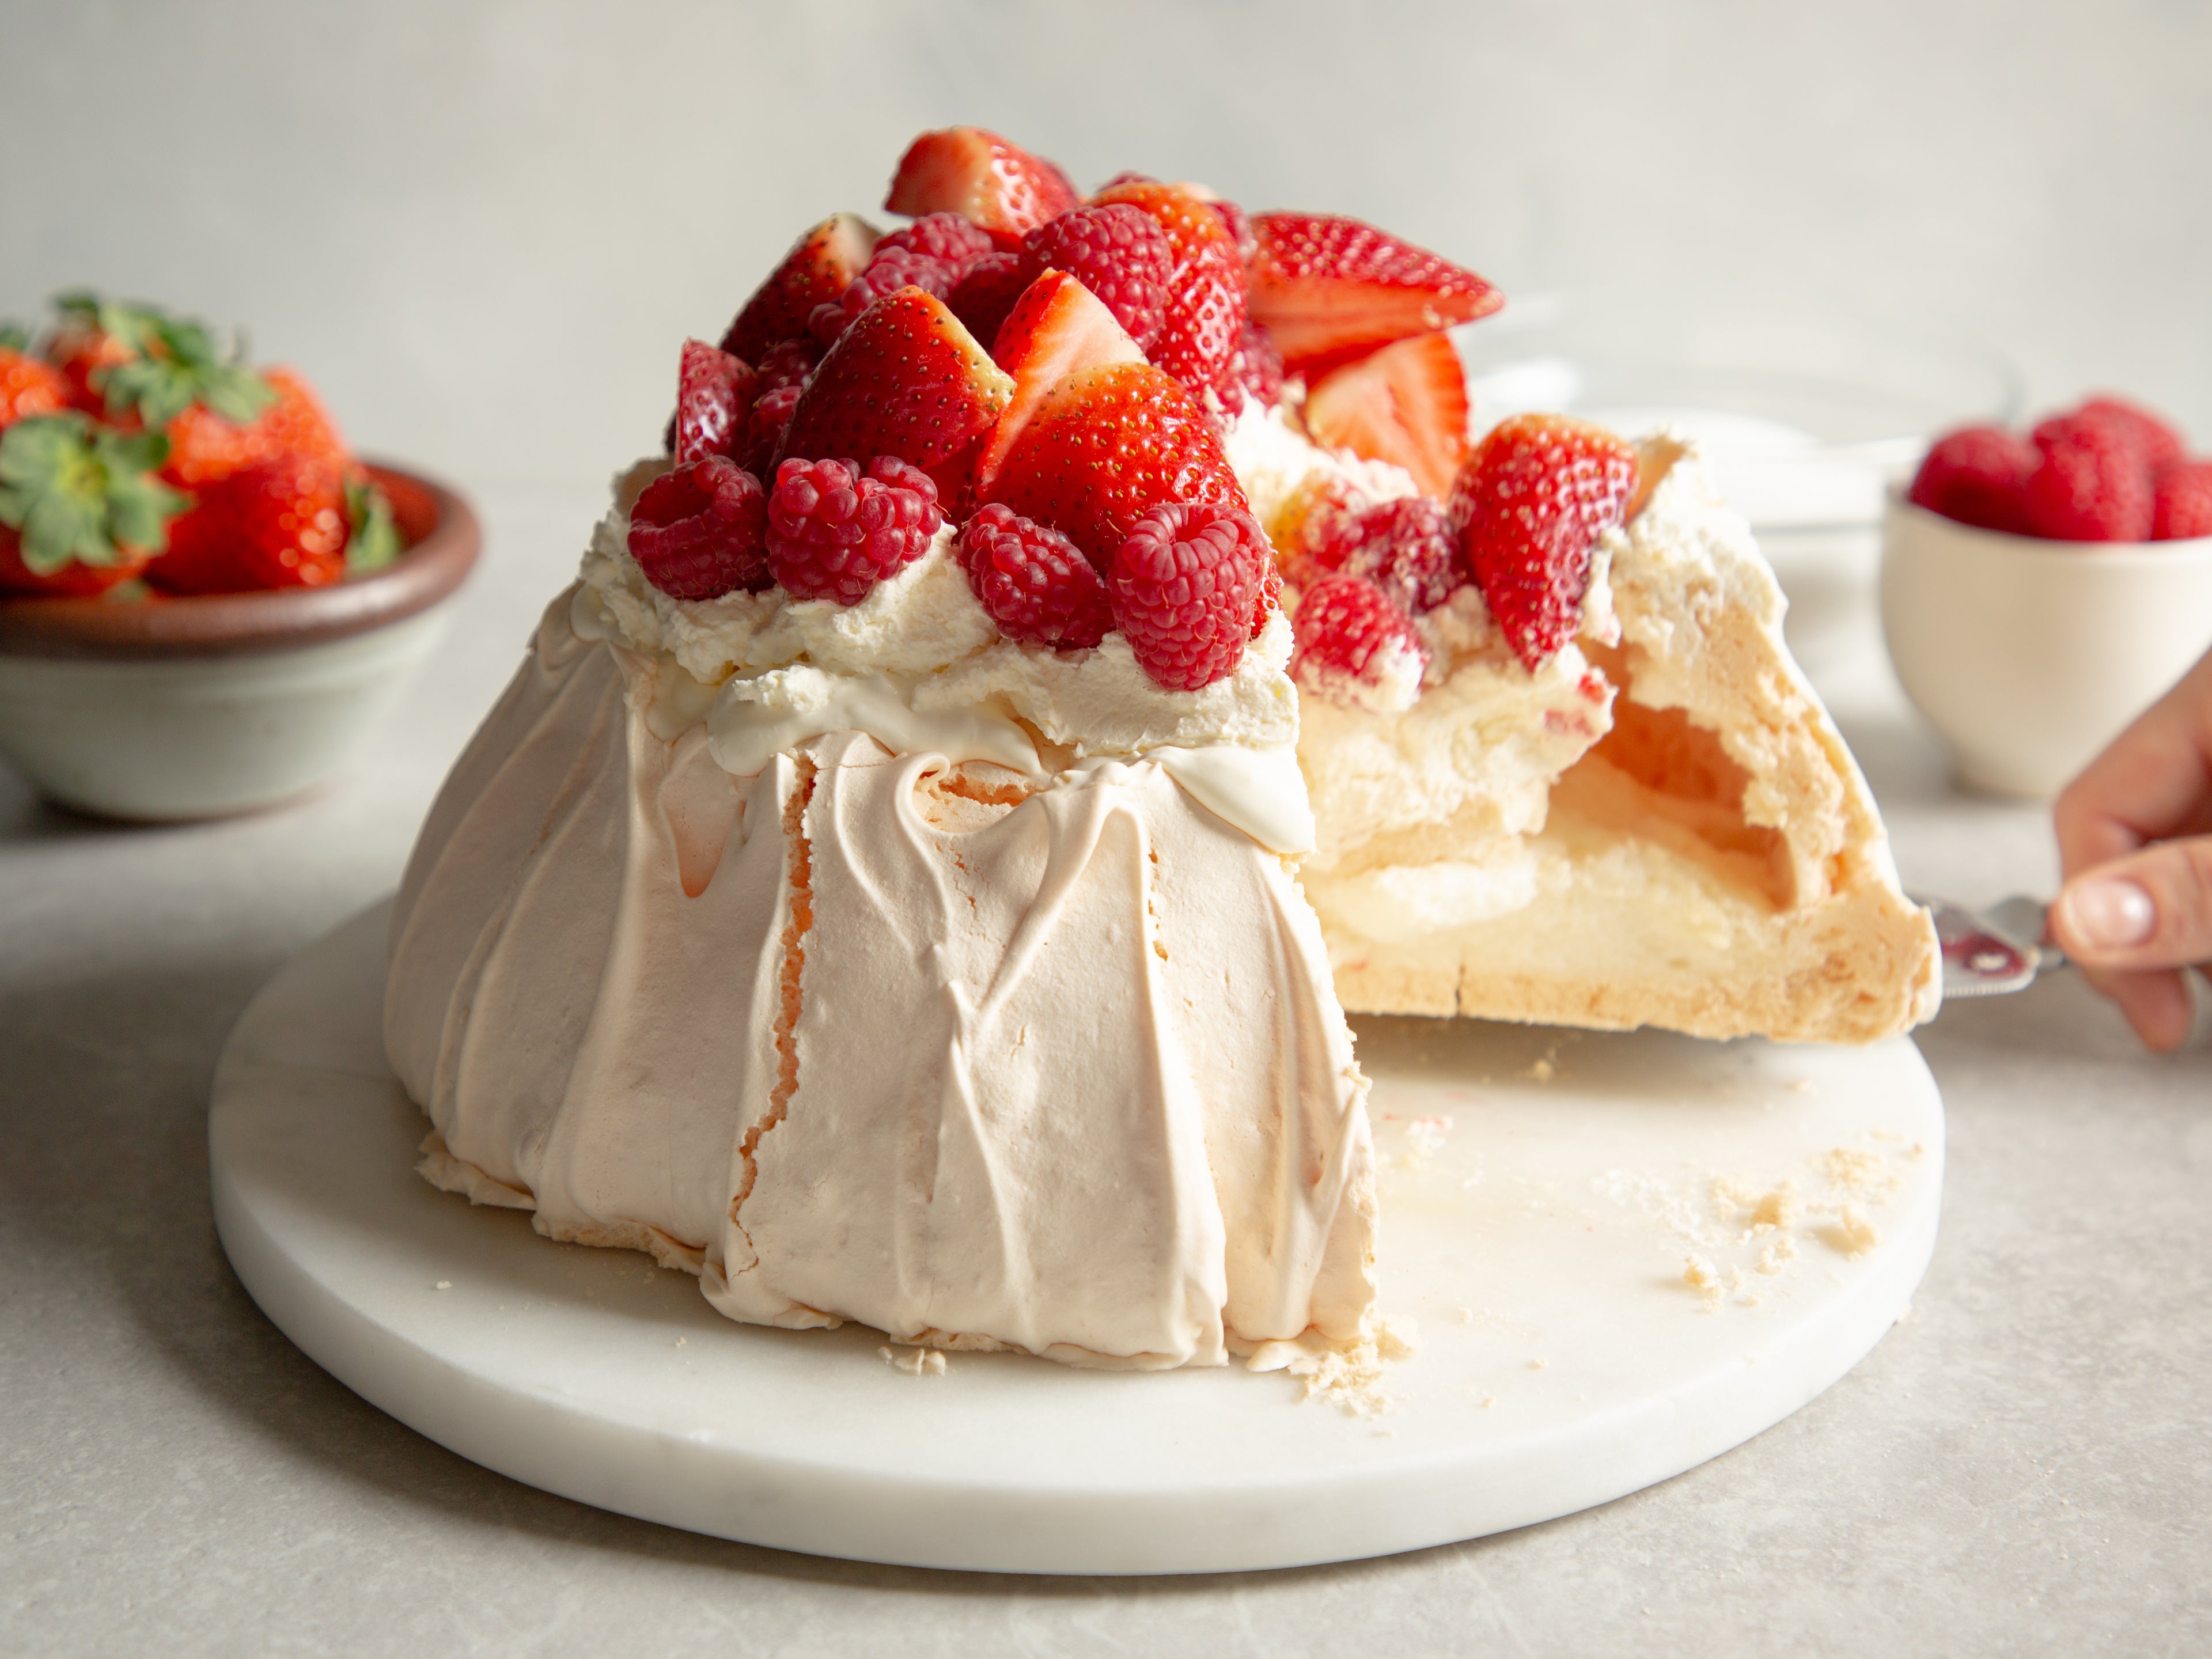 Close up of Strawberry Pavlova with a slice cut out of it showing the chewy, fluffy inside of the meringue